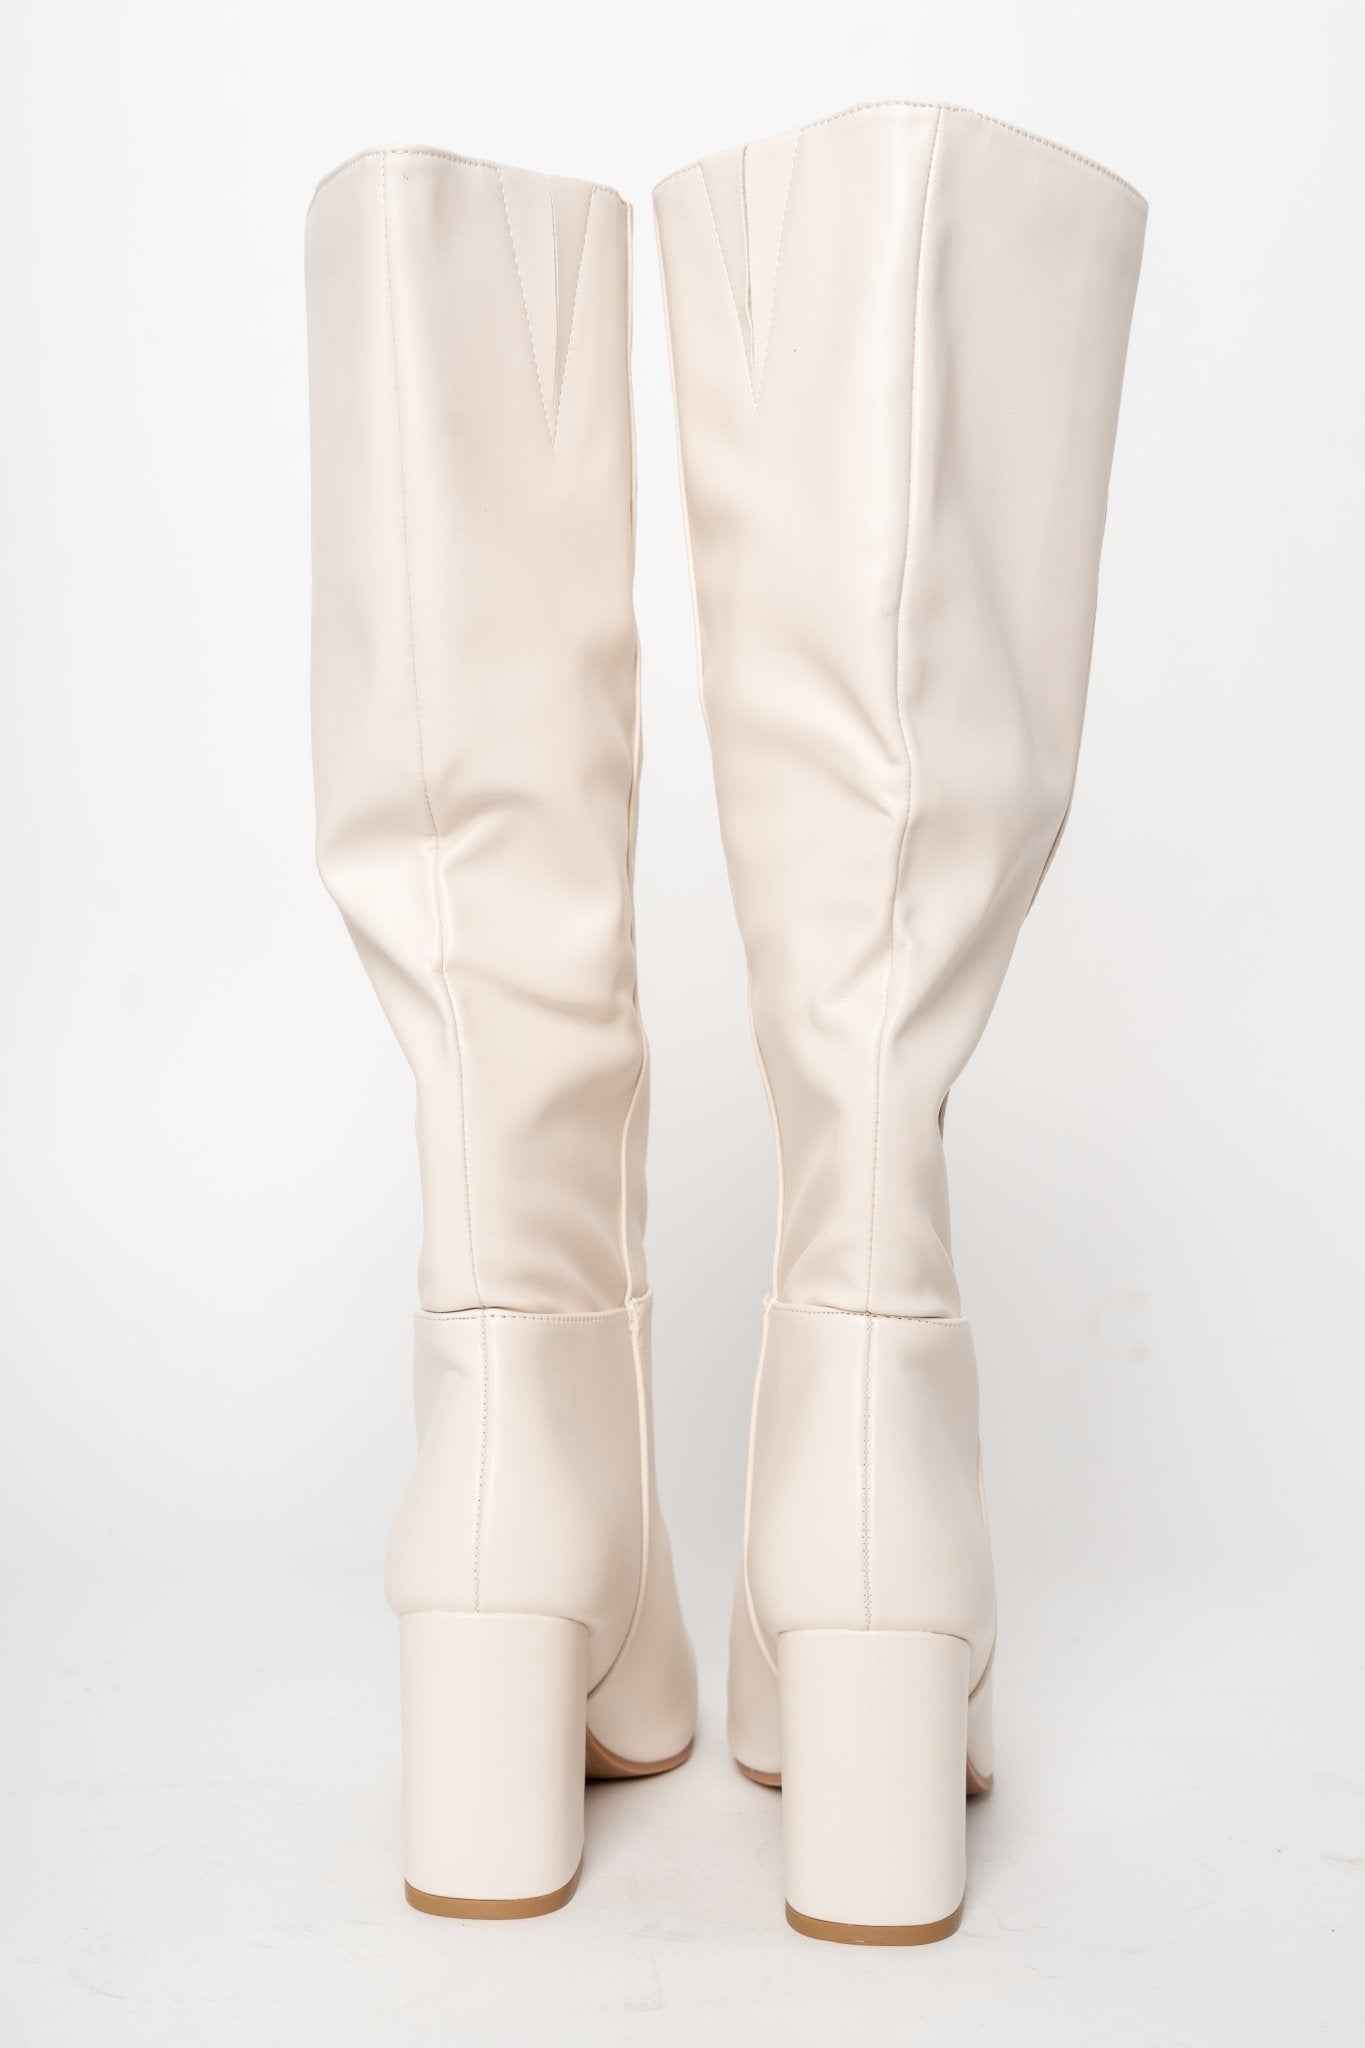 Malone knee high boots off white - Affordable shoes - Boutique Shoes at Lush Fashion Lounge Boutique in Oklahoma City